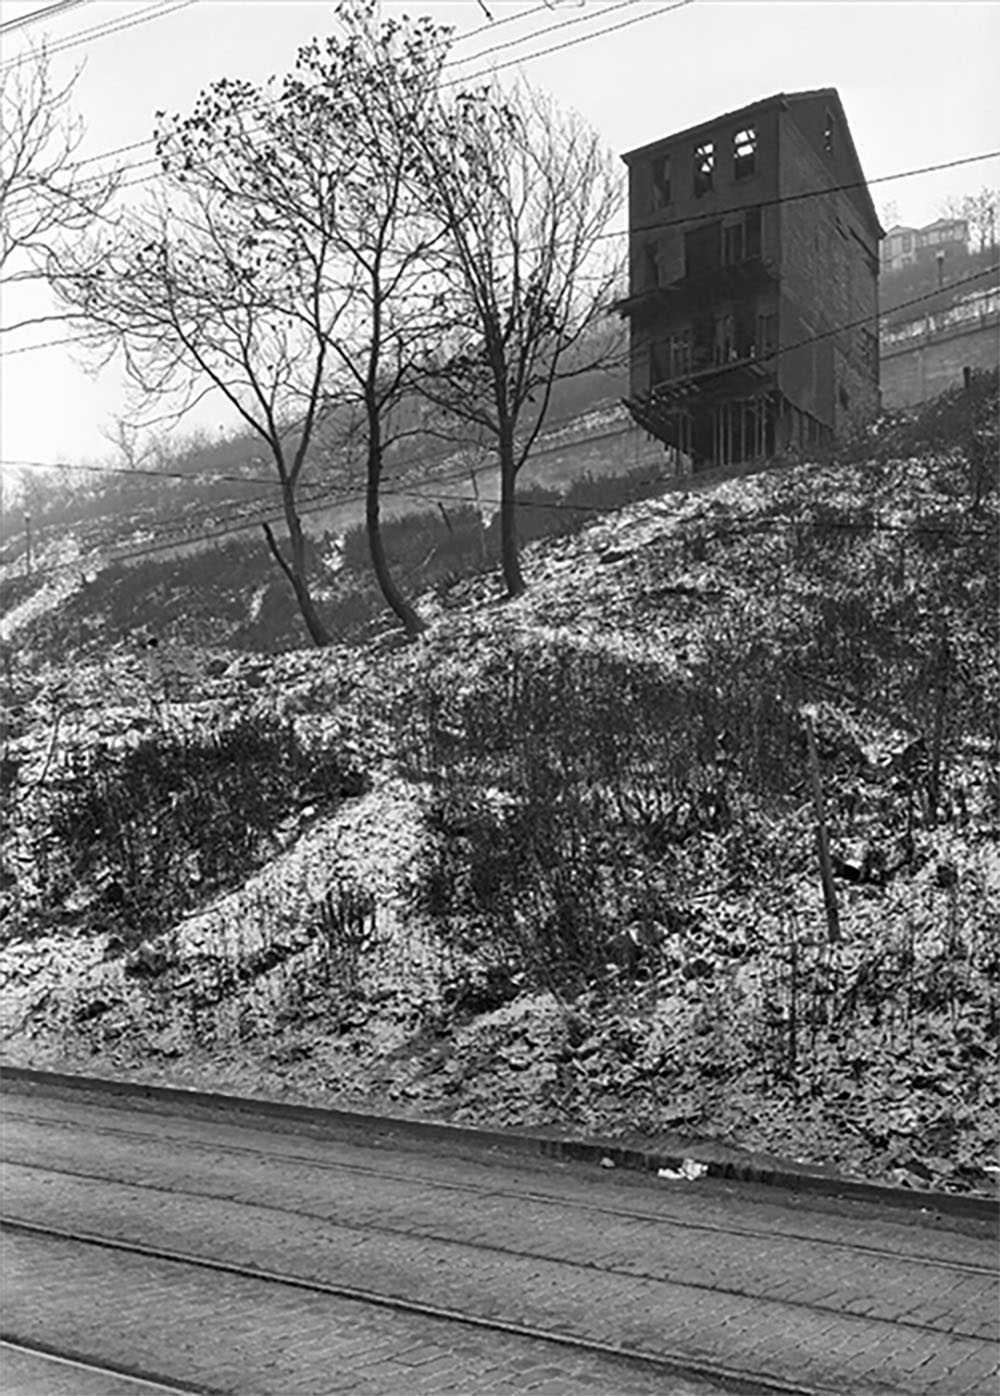 The last remaining of 7 homes that lined Mattisee Street. Credit: House Ready to Fall Down Hill, December 3, 1930, Pittsburgh City Photographer Collection, Historic Pittsburgh Site.